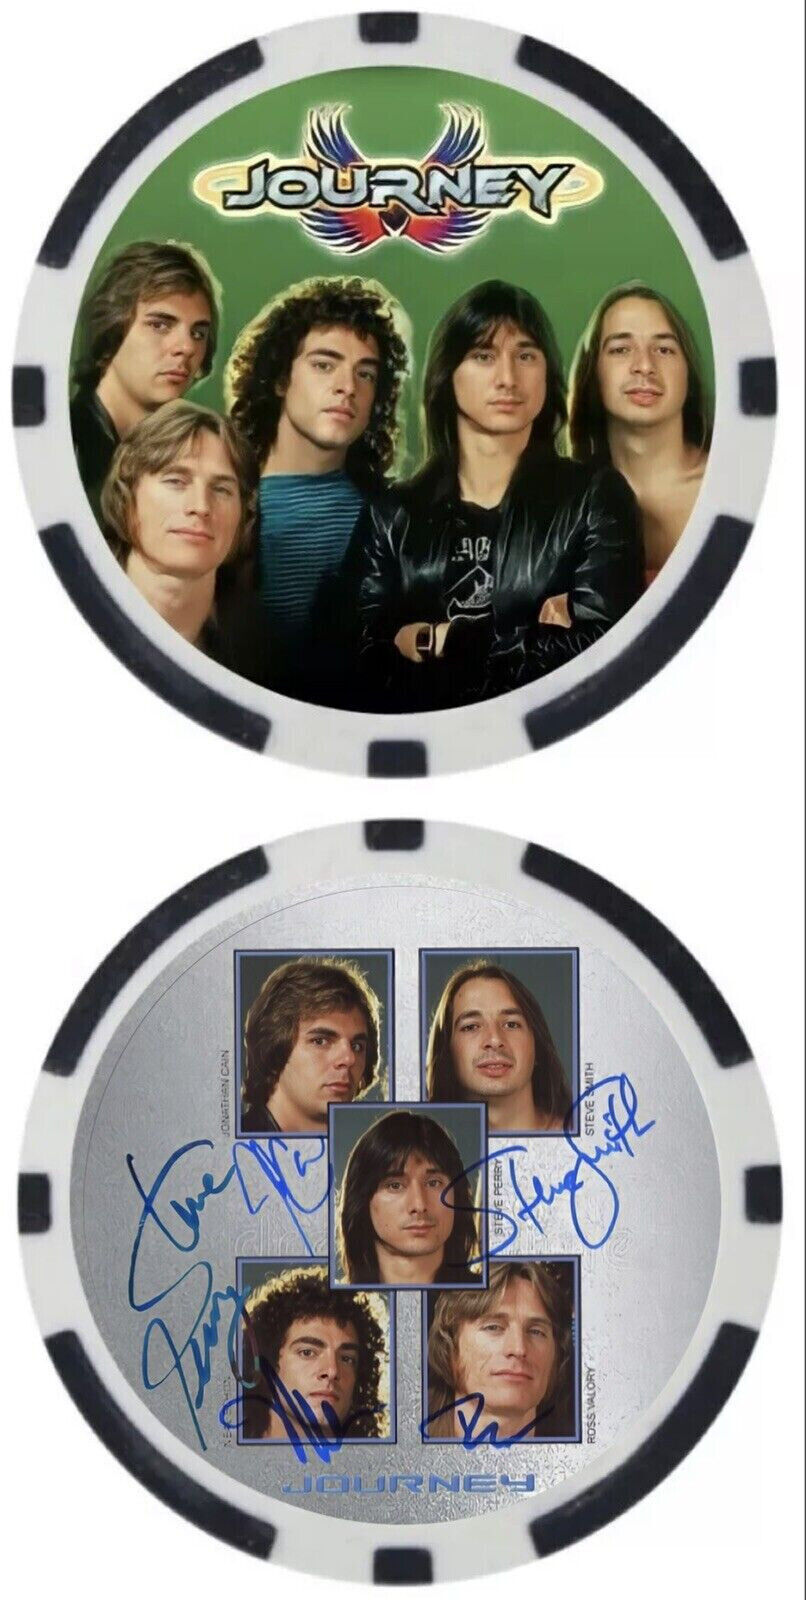 JOURNEY - Steve Perry, Neal Schon, Valory & Smith - POKER CHIP - ***SIGNED***